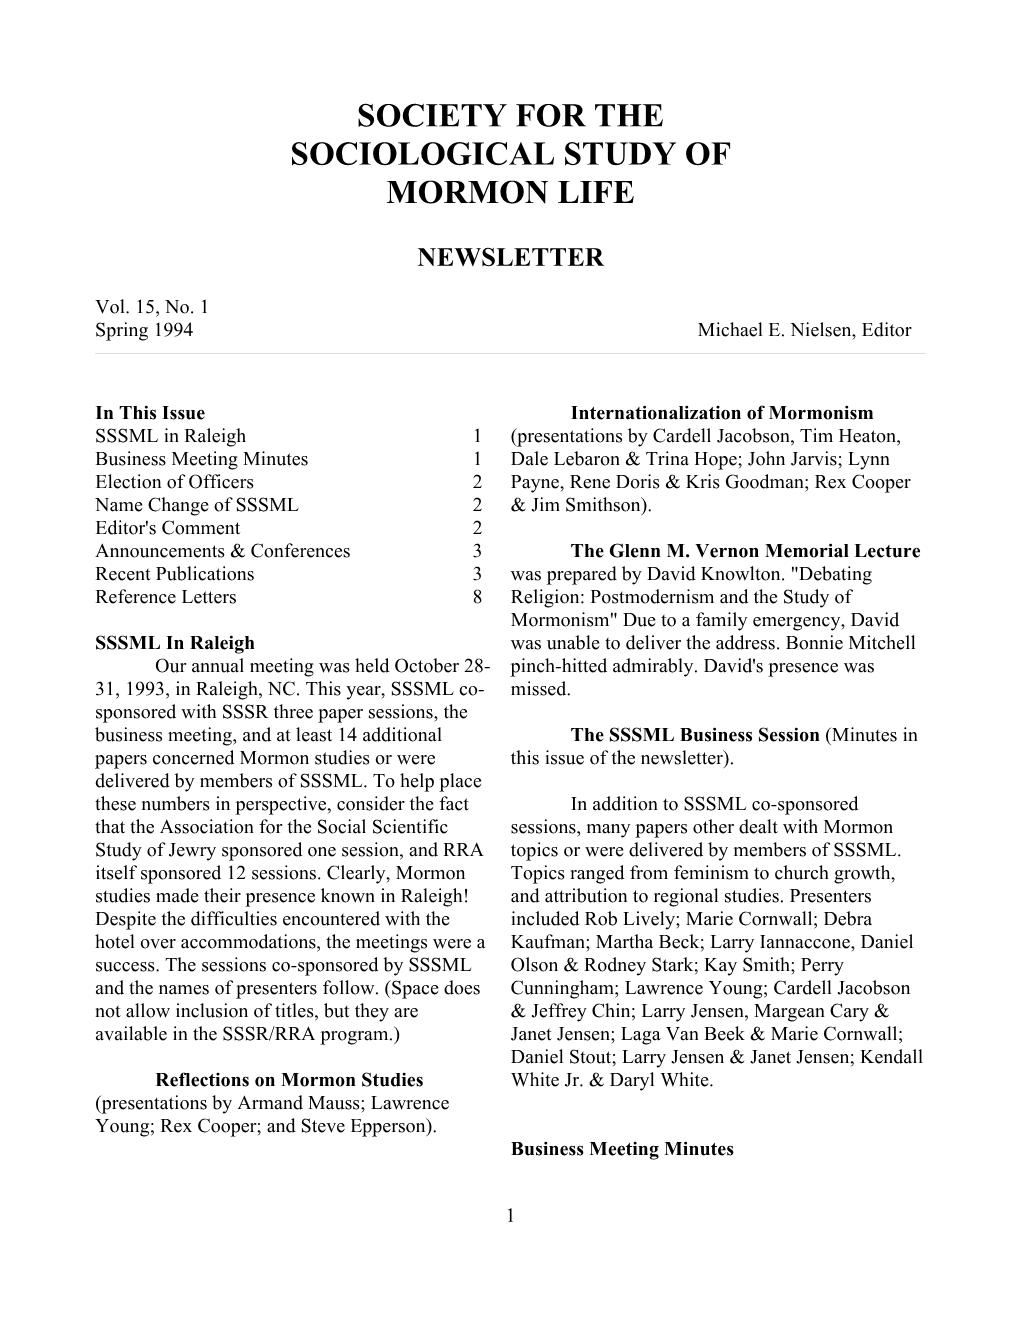 Society for the Sociological Study of Mormon Life